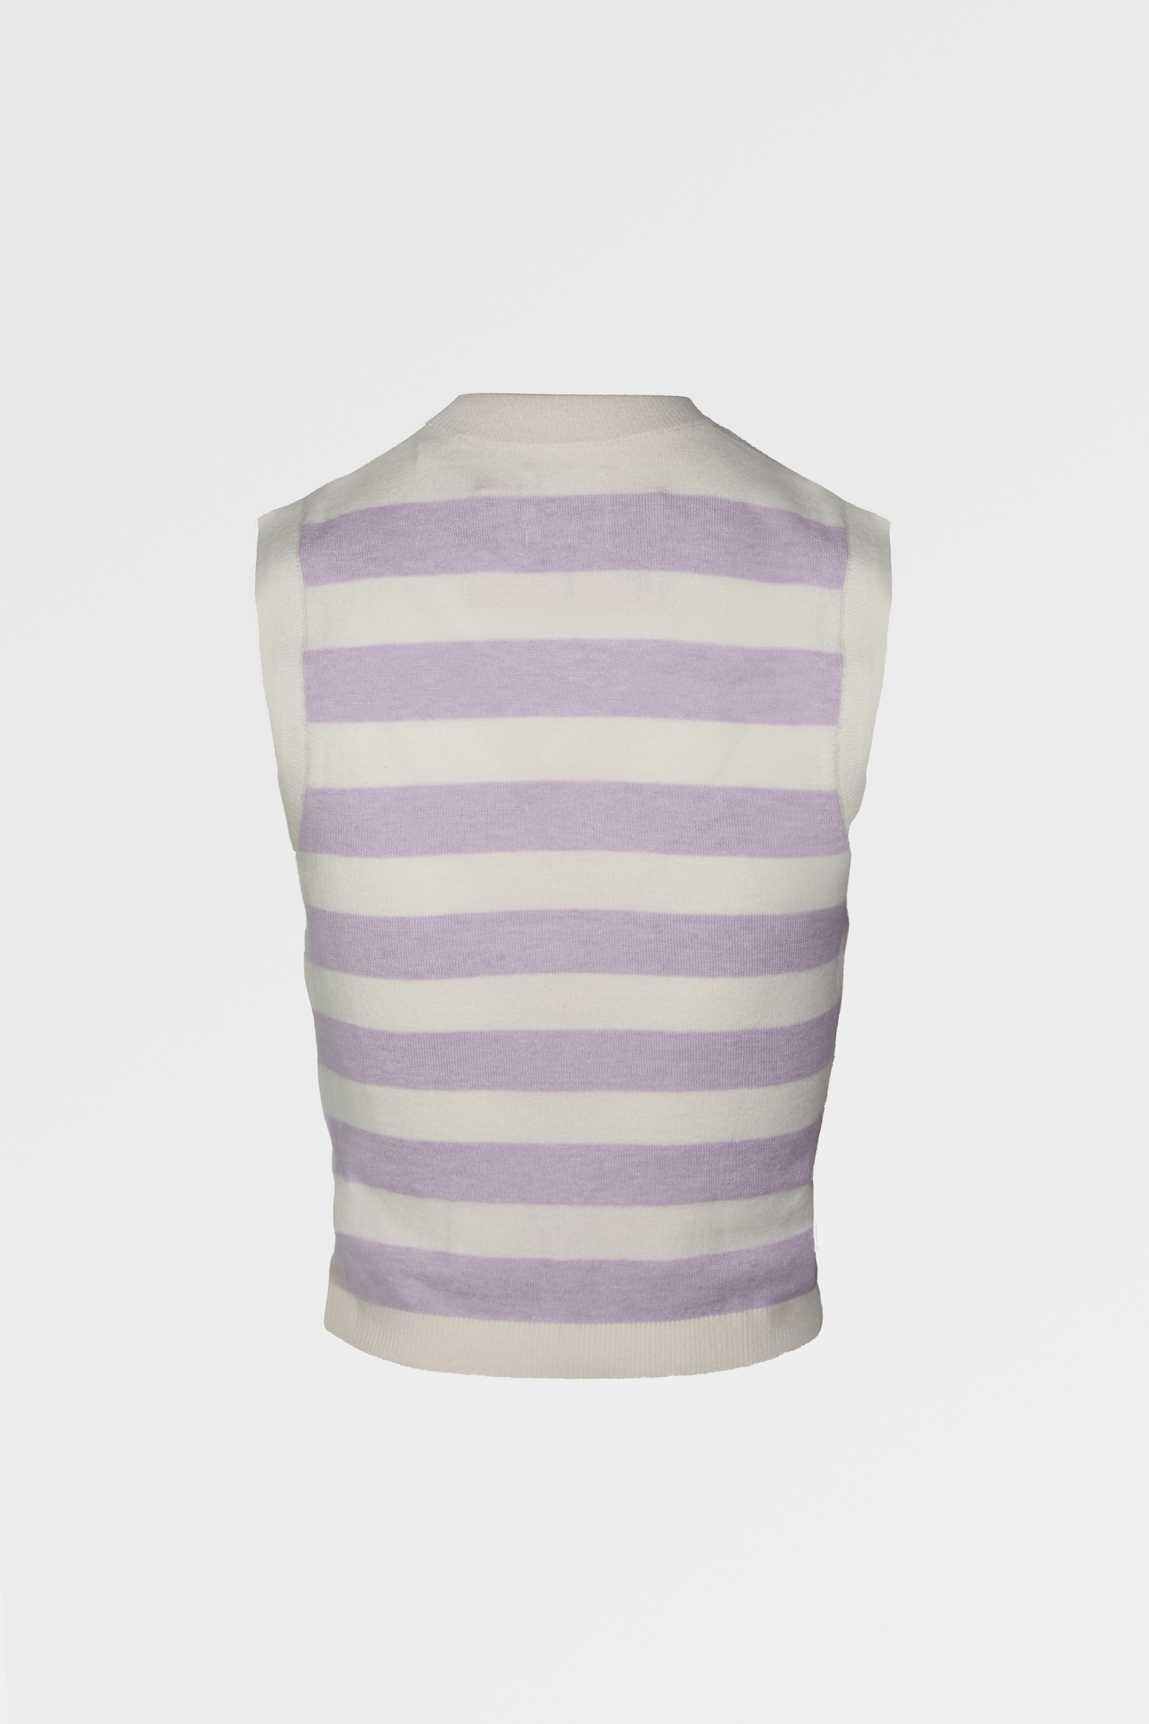 Sweater Lilac Casual Woman